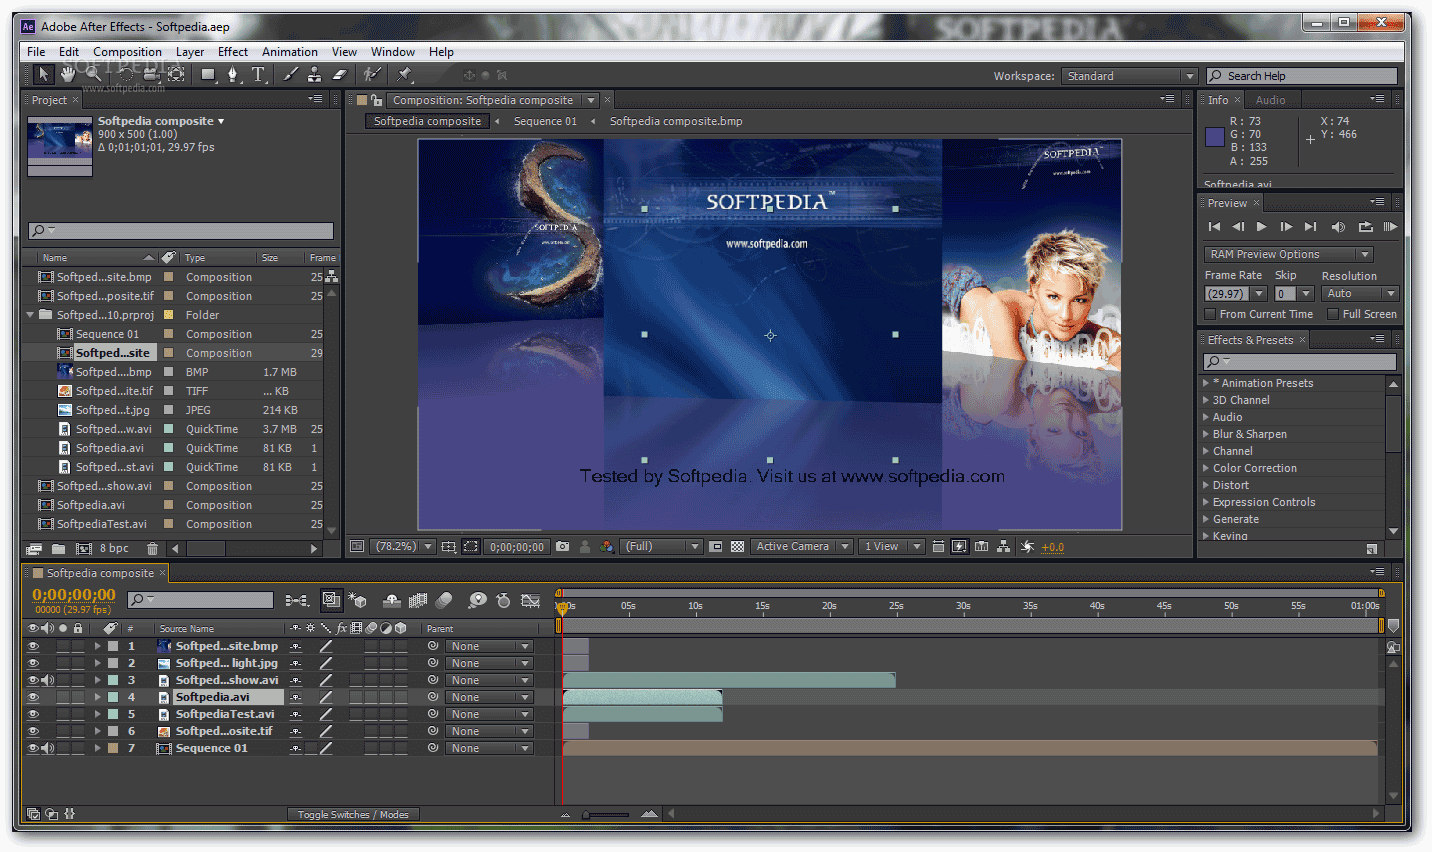 adobe after effects cs4 free download for windows 7 32bit